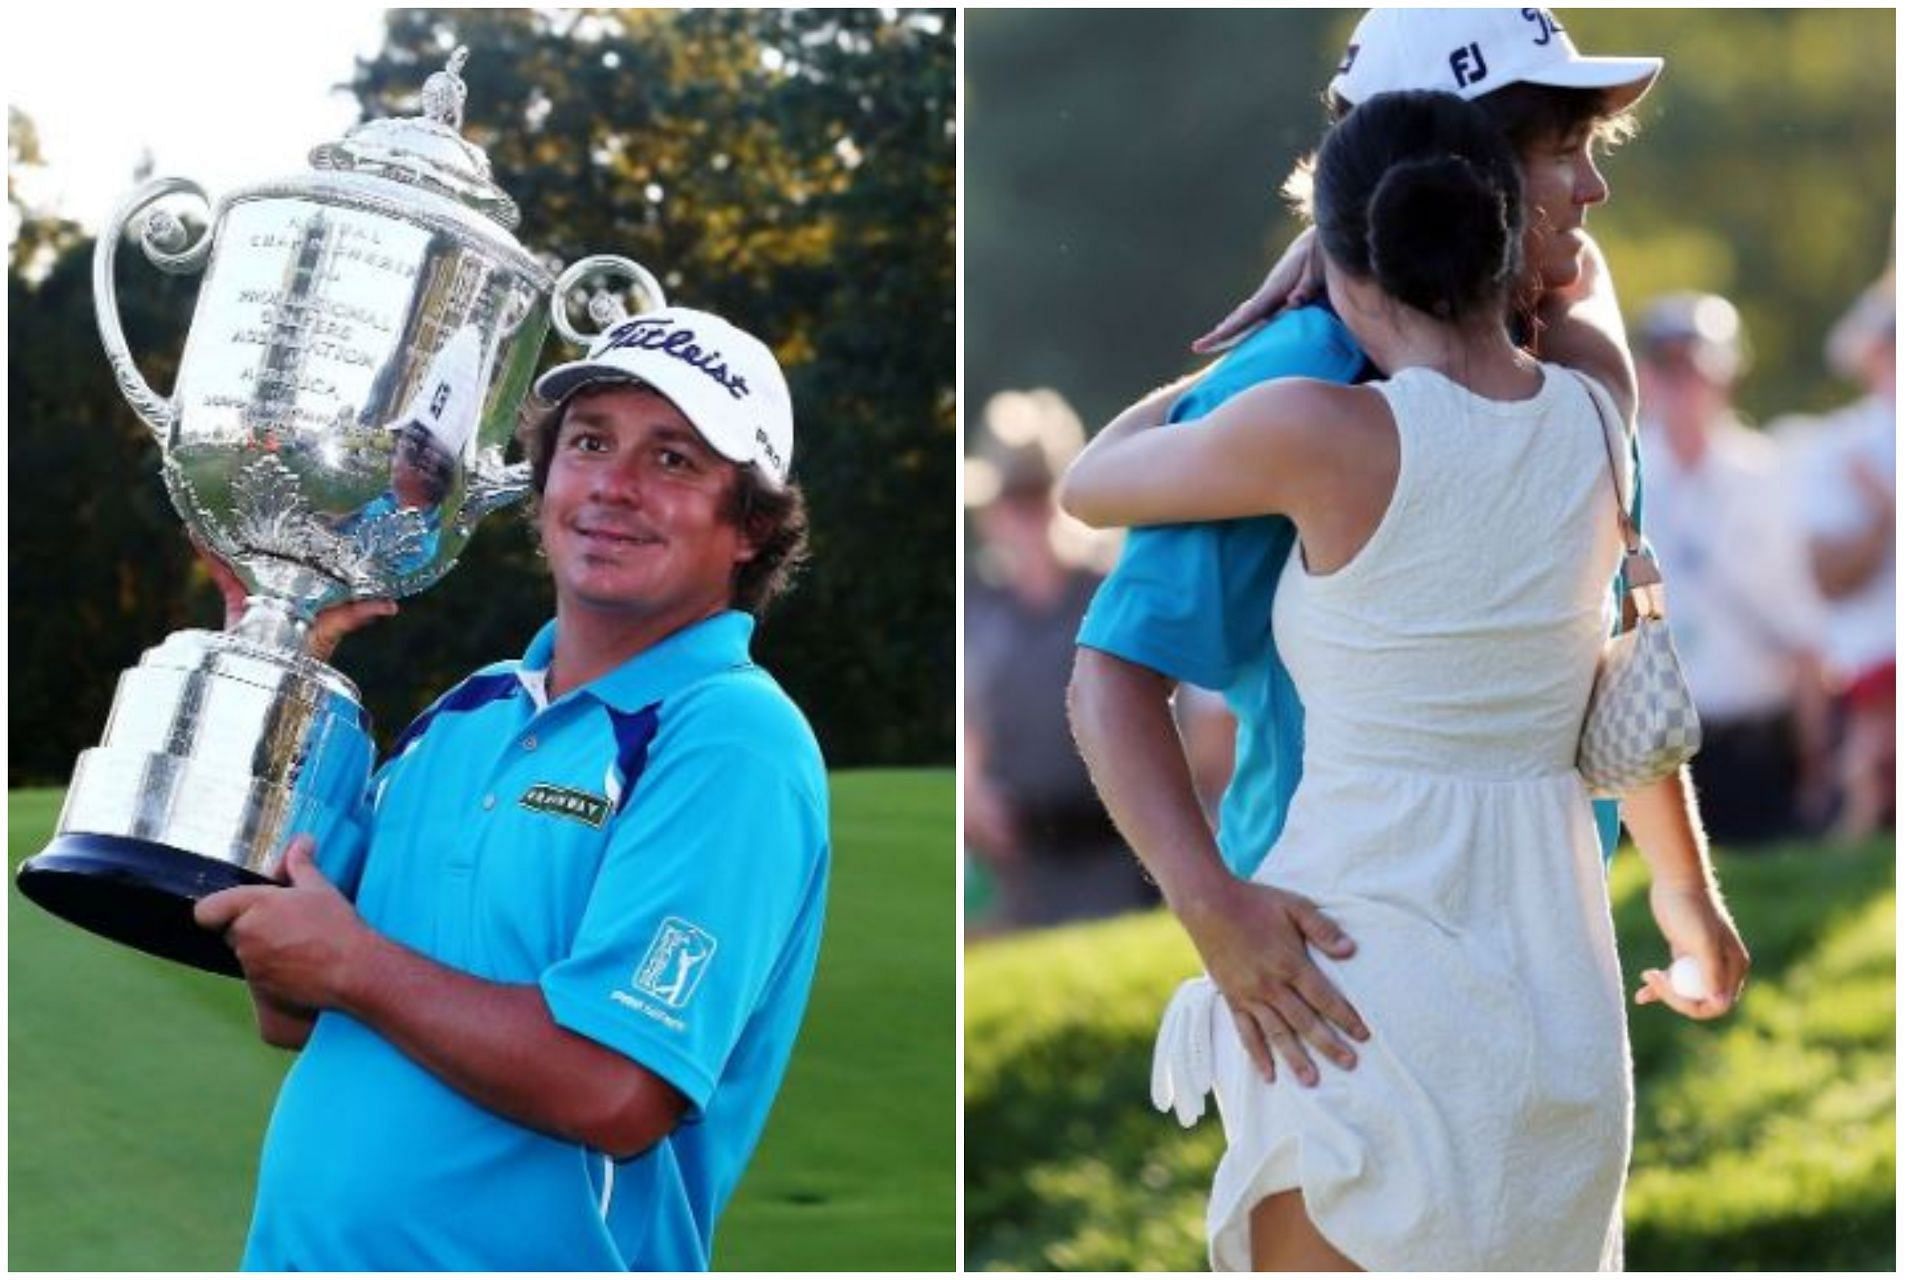 Jason Dufner with his wife after winning the 2013 PGA Championship (via Getty Images)